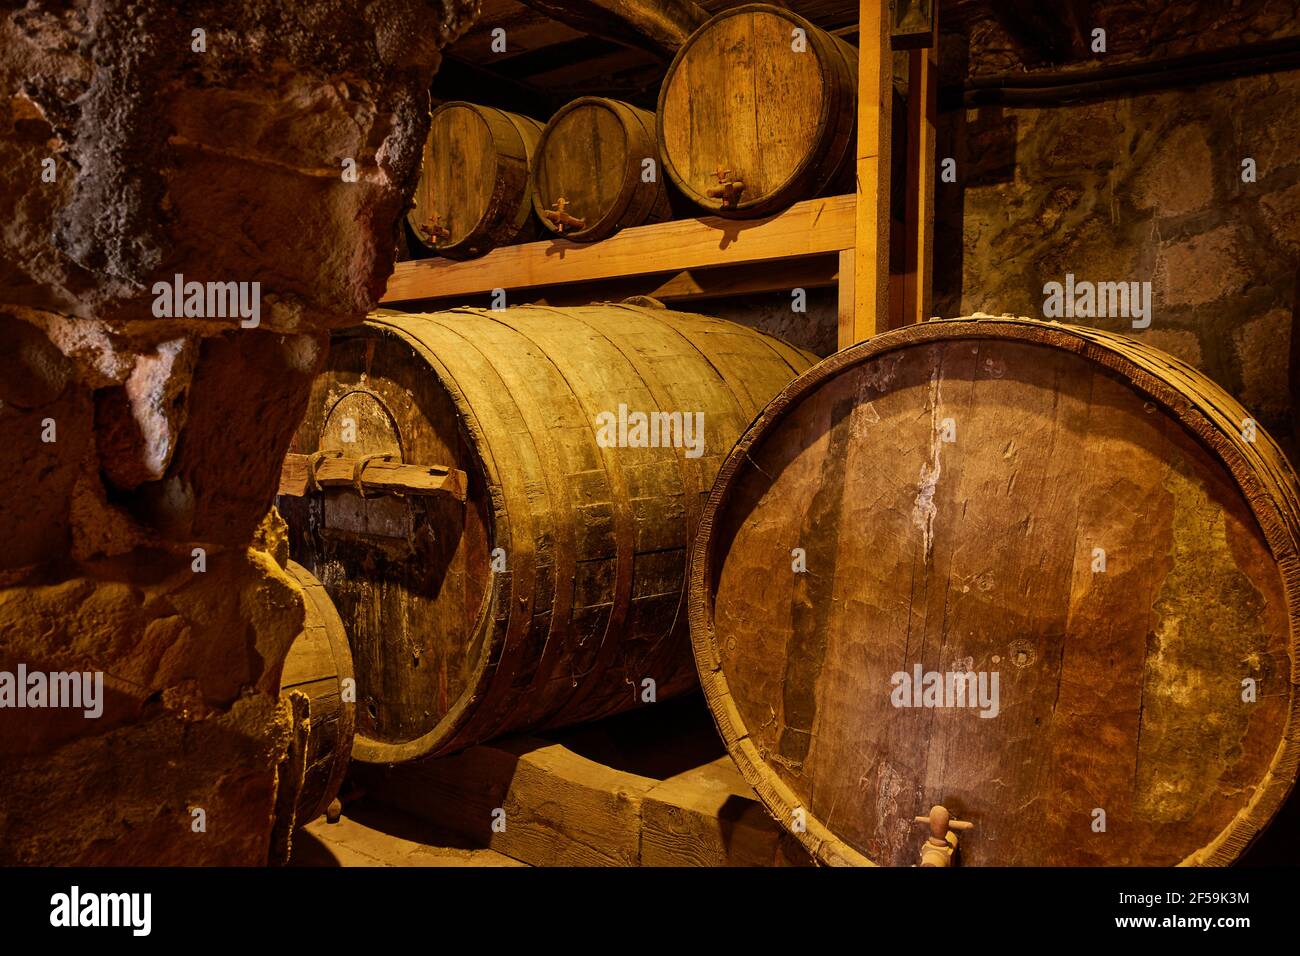 Wine barrels and casks with kegs on shelve in old wine-cellar Stock Photo